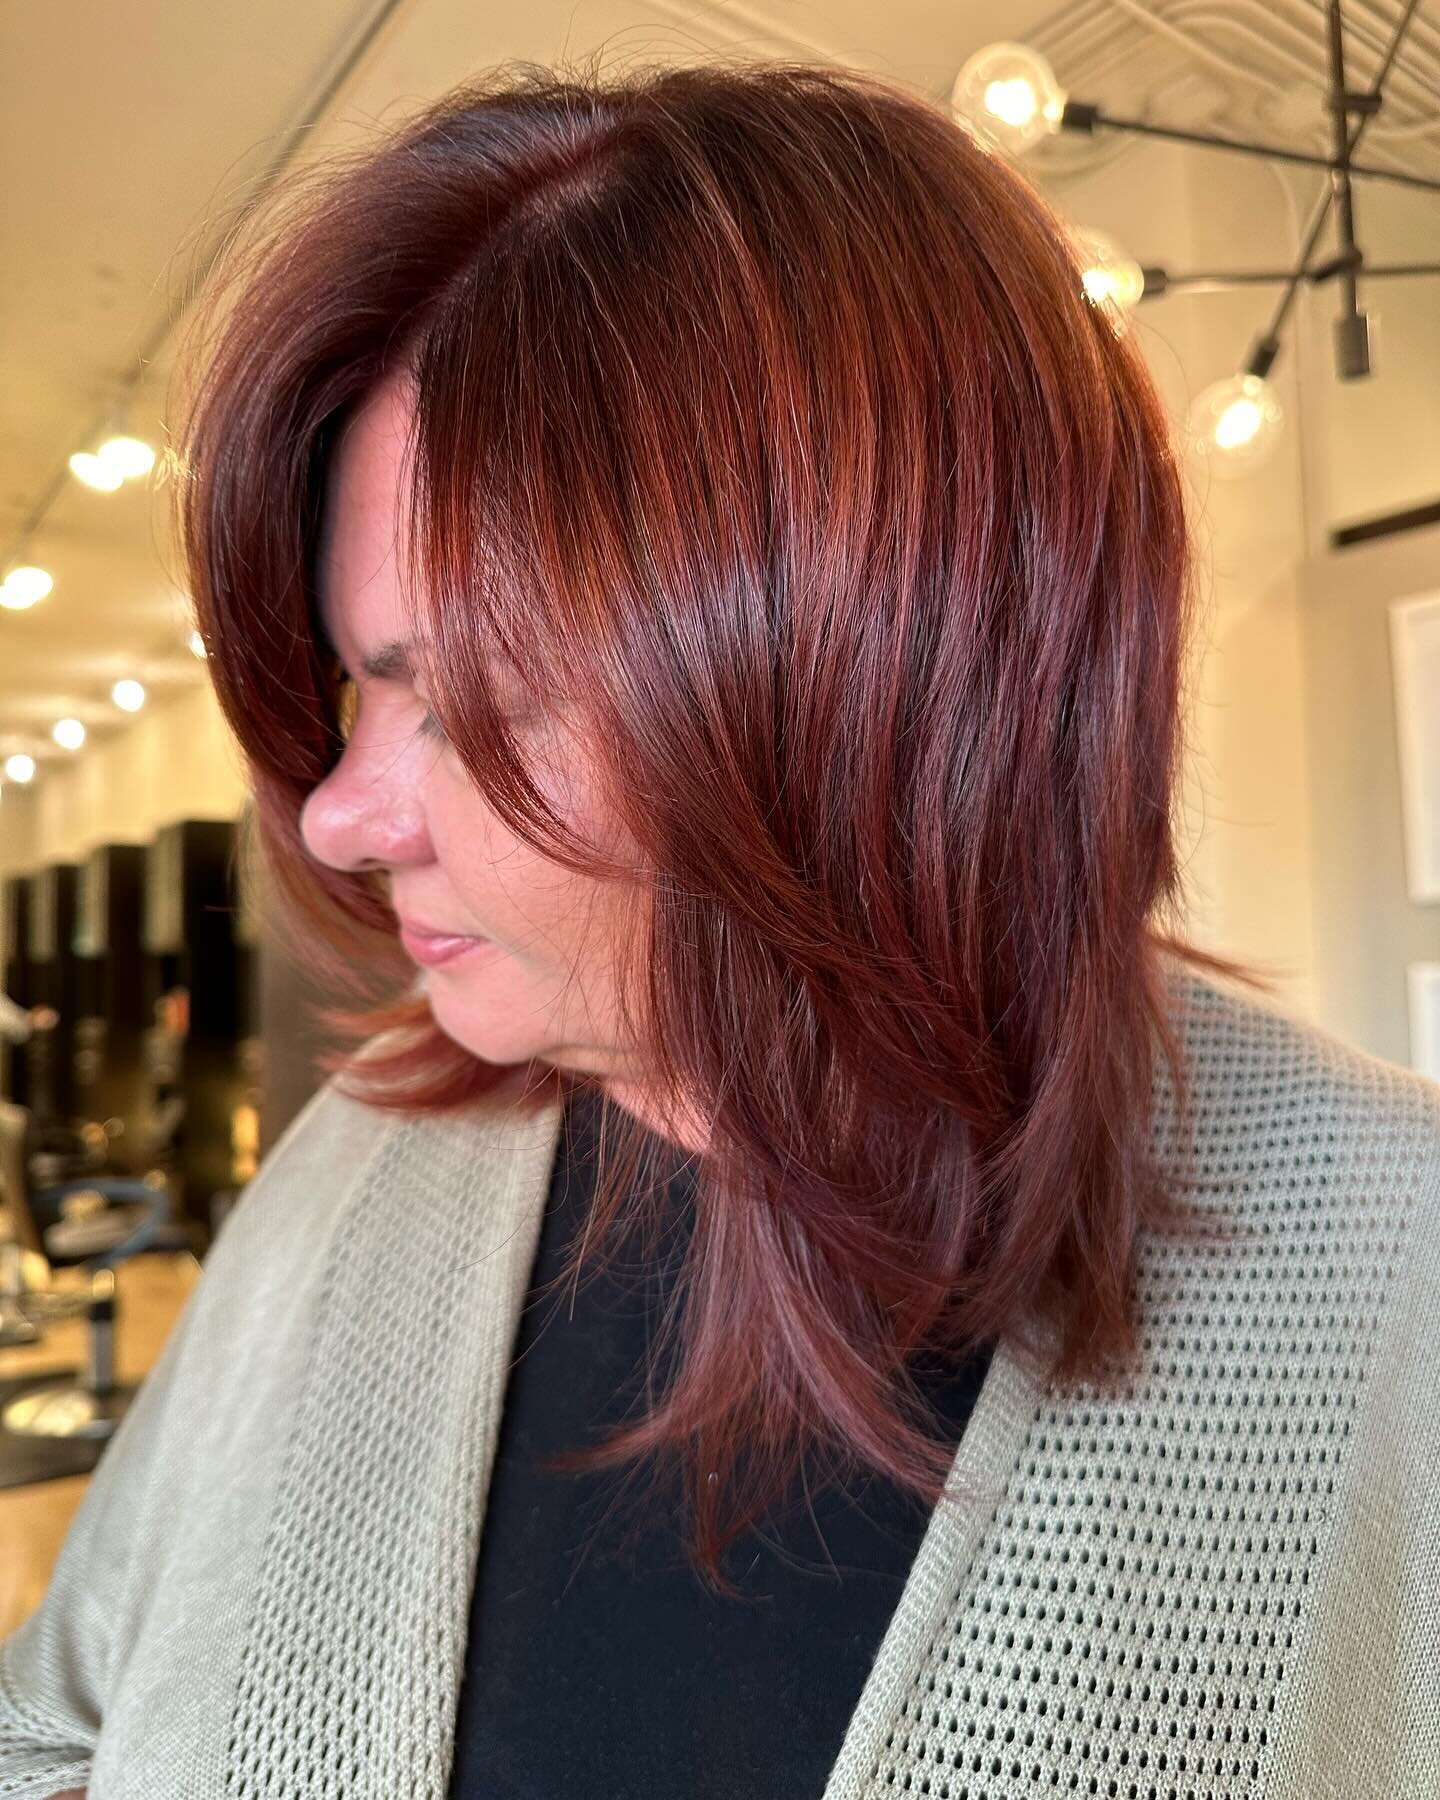 Happiness is a good hair day 
&bull;
&bull;
Done by Molly 
#redhair #holidayseason #red #copper #redhead #goldwell #goldwellcolor #goldwellapprovedus #rodeored #longbeach #belmontshore #hairstylist #lbhairstylist